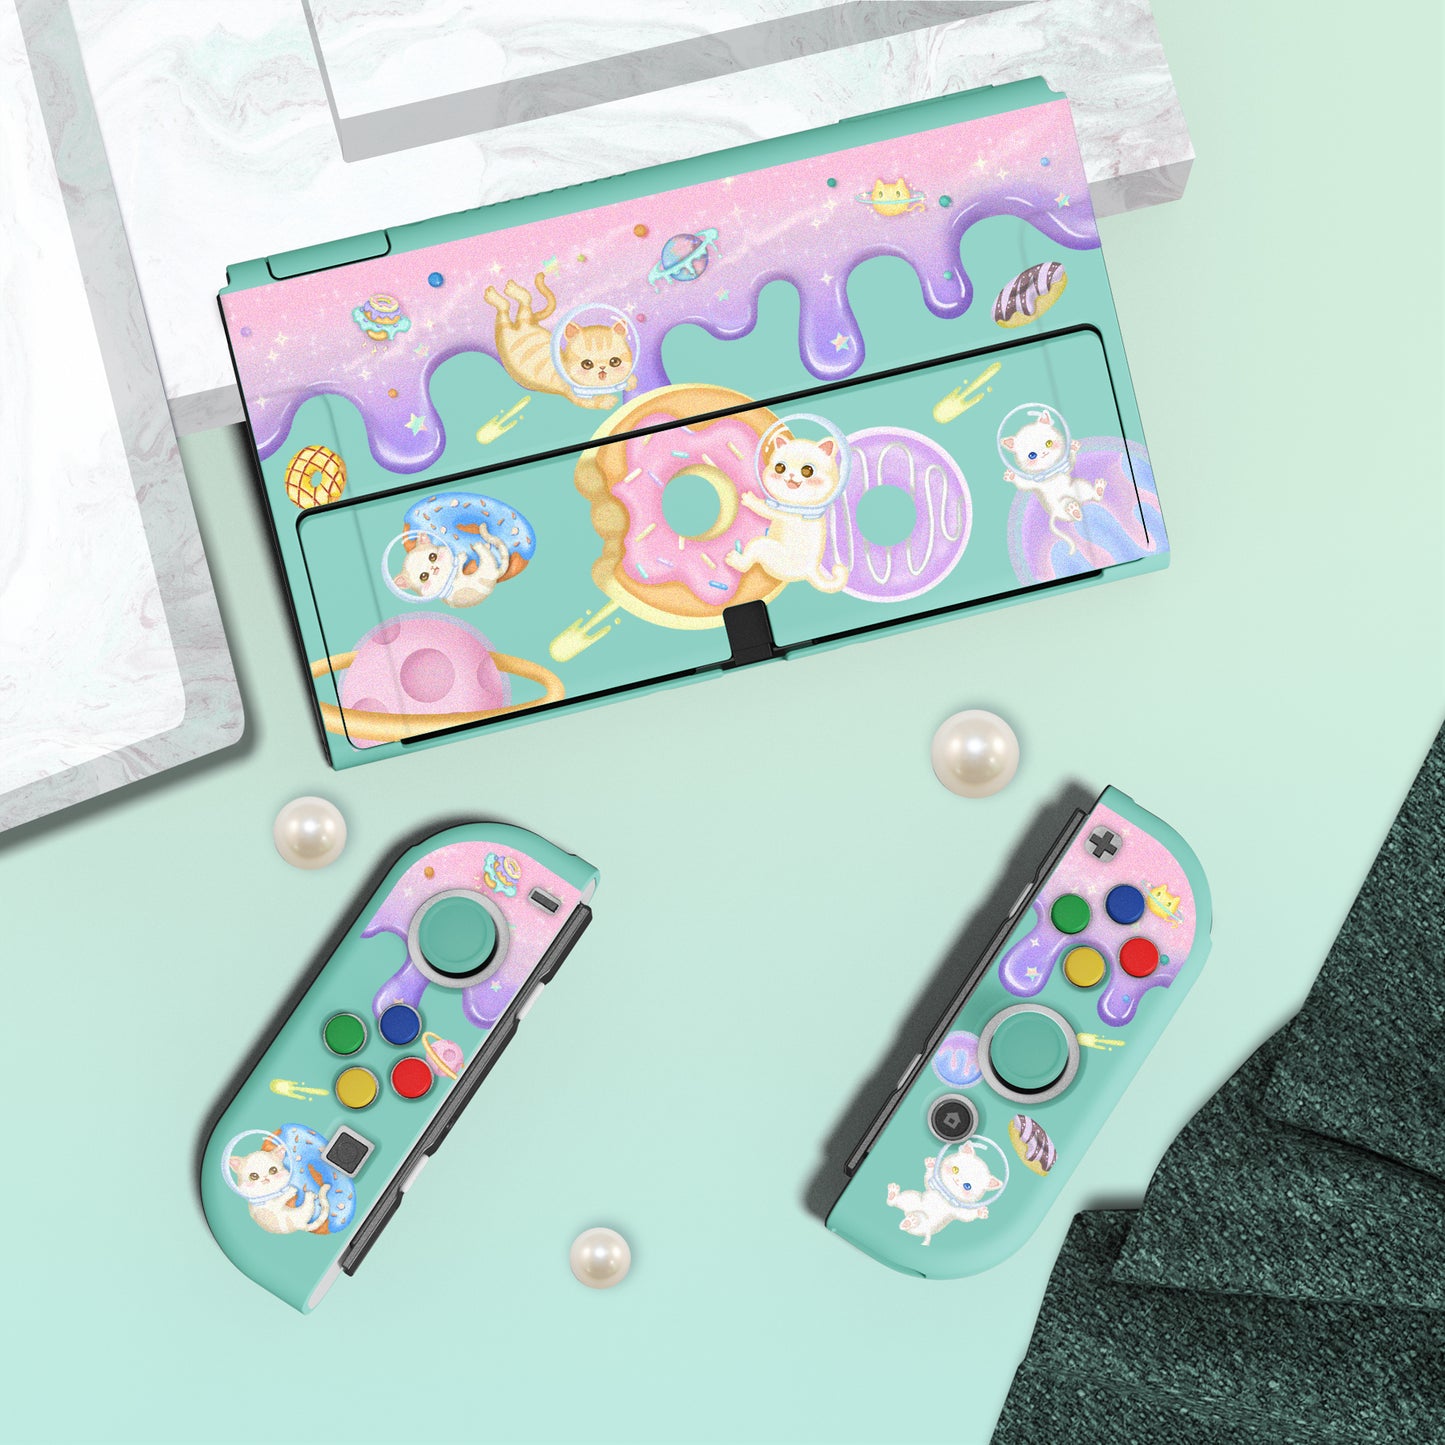 PlayVital ZealProtect Soft Protective Case for Switch OLED, Flexible Protector Joycon Grip Cover for Switch OLED with Thumb Grip Caps & ABXY Direction Button Caps - Donut Odyssey - XSOYV6013 playvital